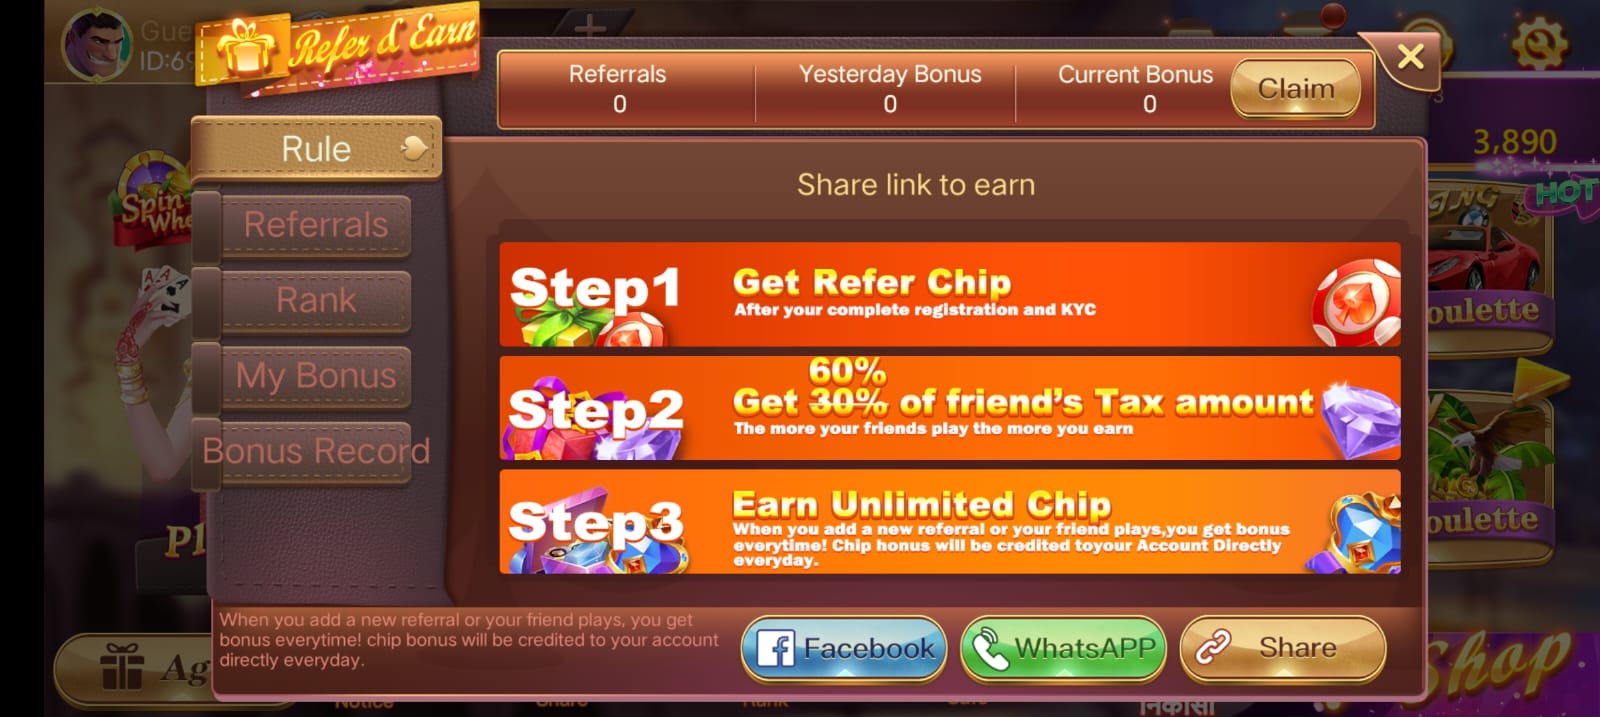 Refer And Earn In Rummy Bloc App